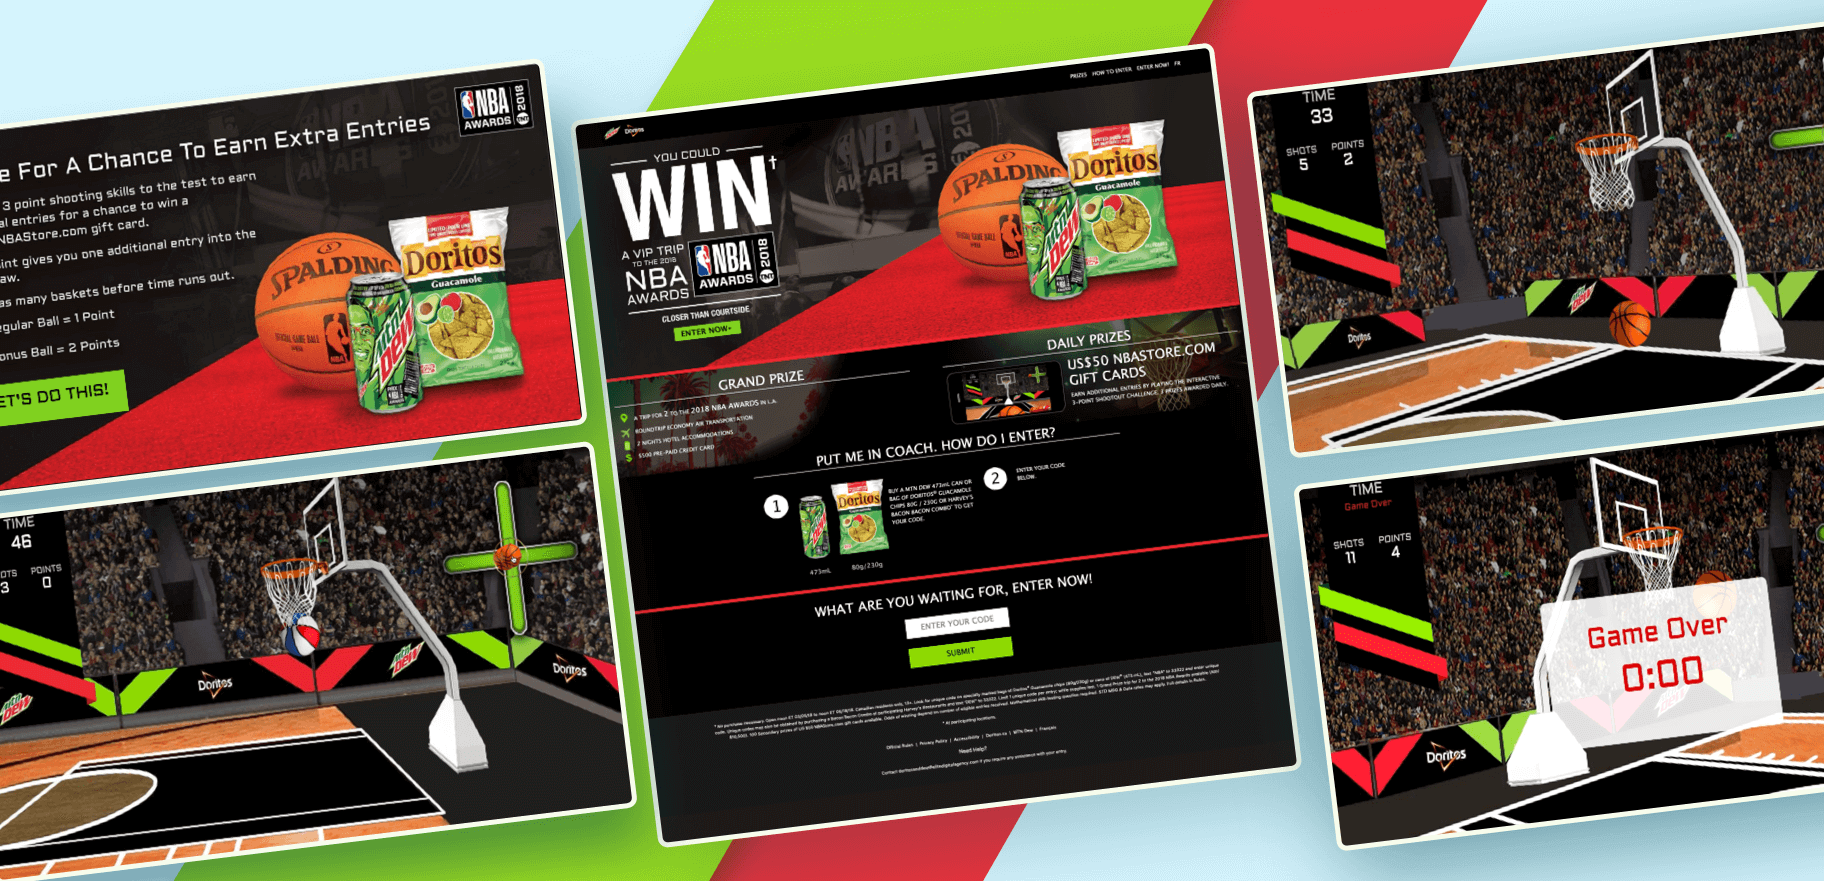 Webpages of gamified contest Elite Digital created for Mountain Dew and Doritos.